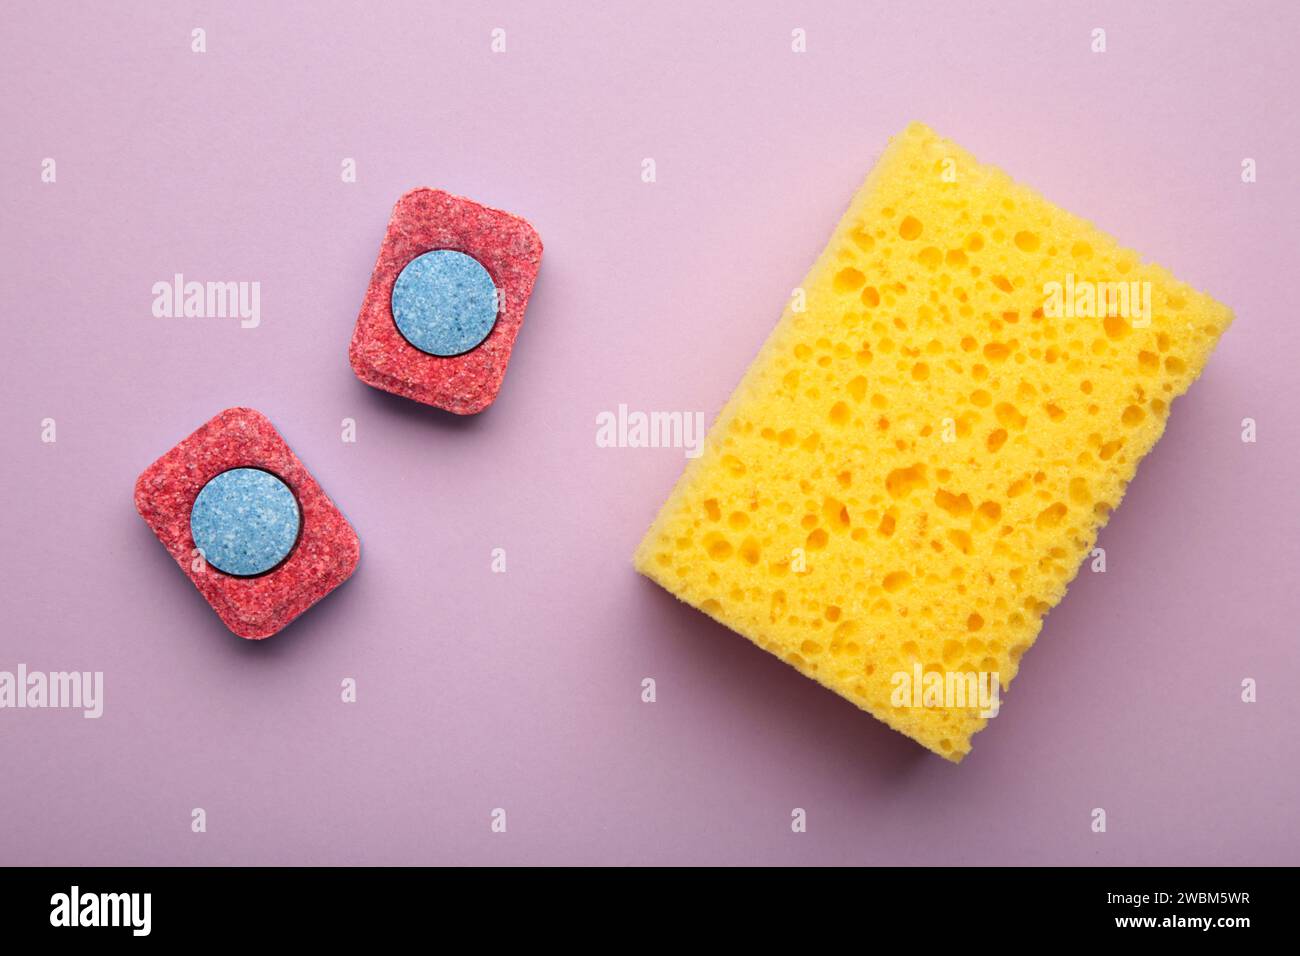 Dishwasher tablets on a dishwashing sponges on a purple background, dishwashing products. Top view Stock Photo